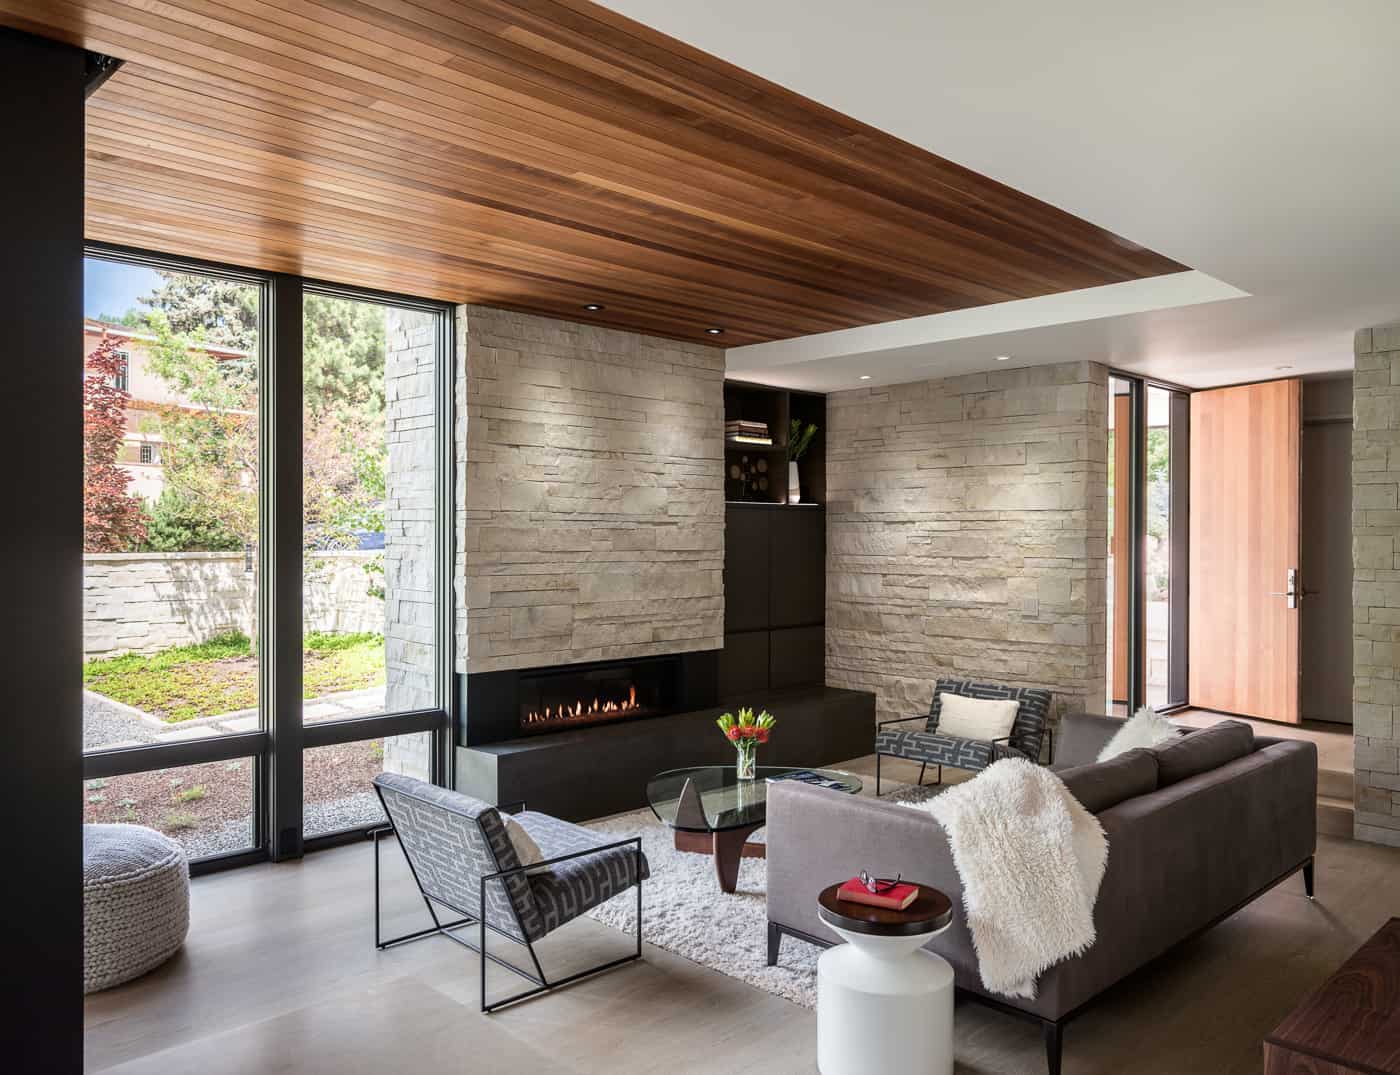 Minimalist modern living room with wood ceiling, stone fireplace, and floor to ceiling windows